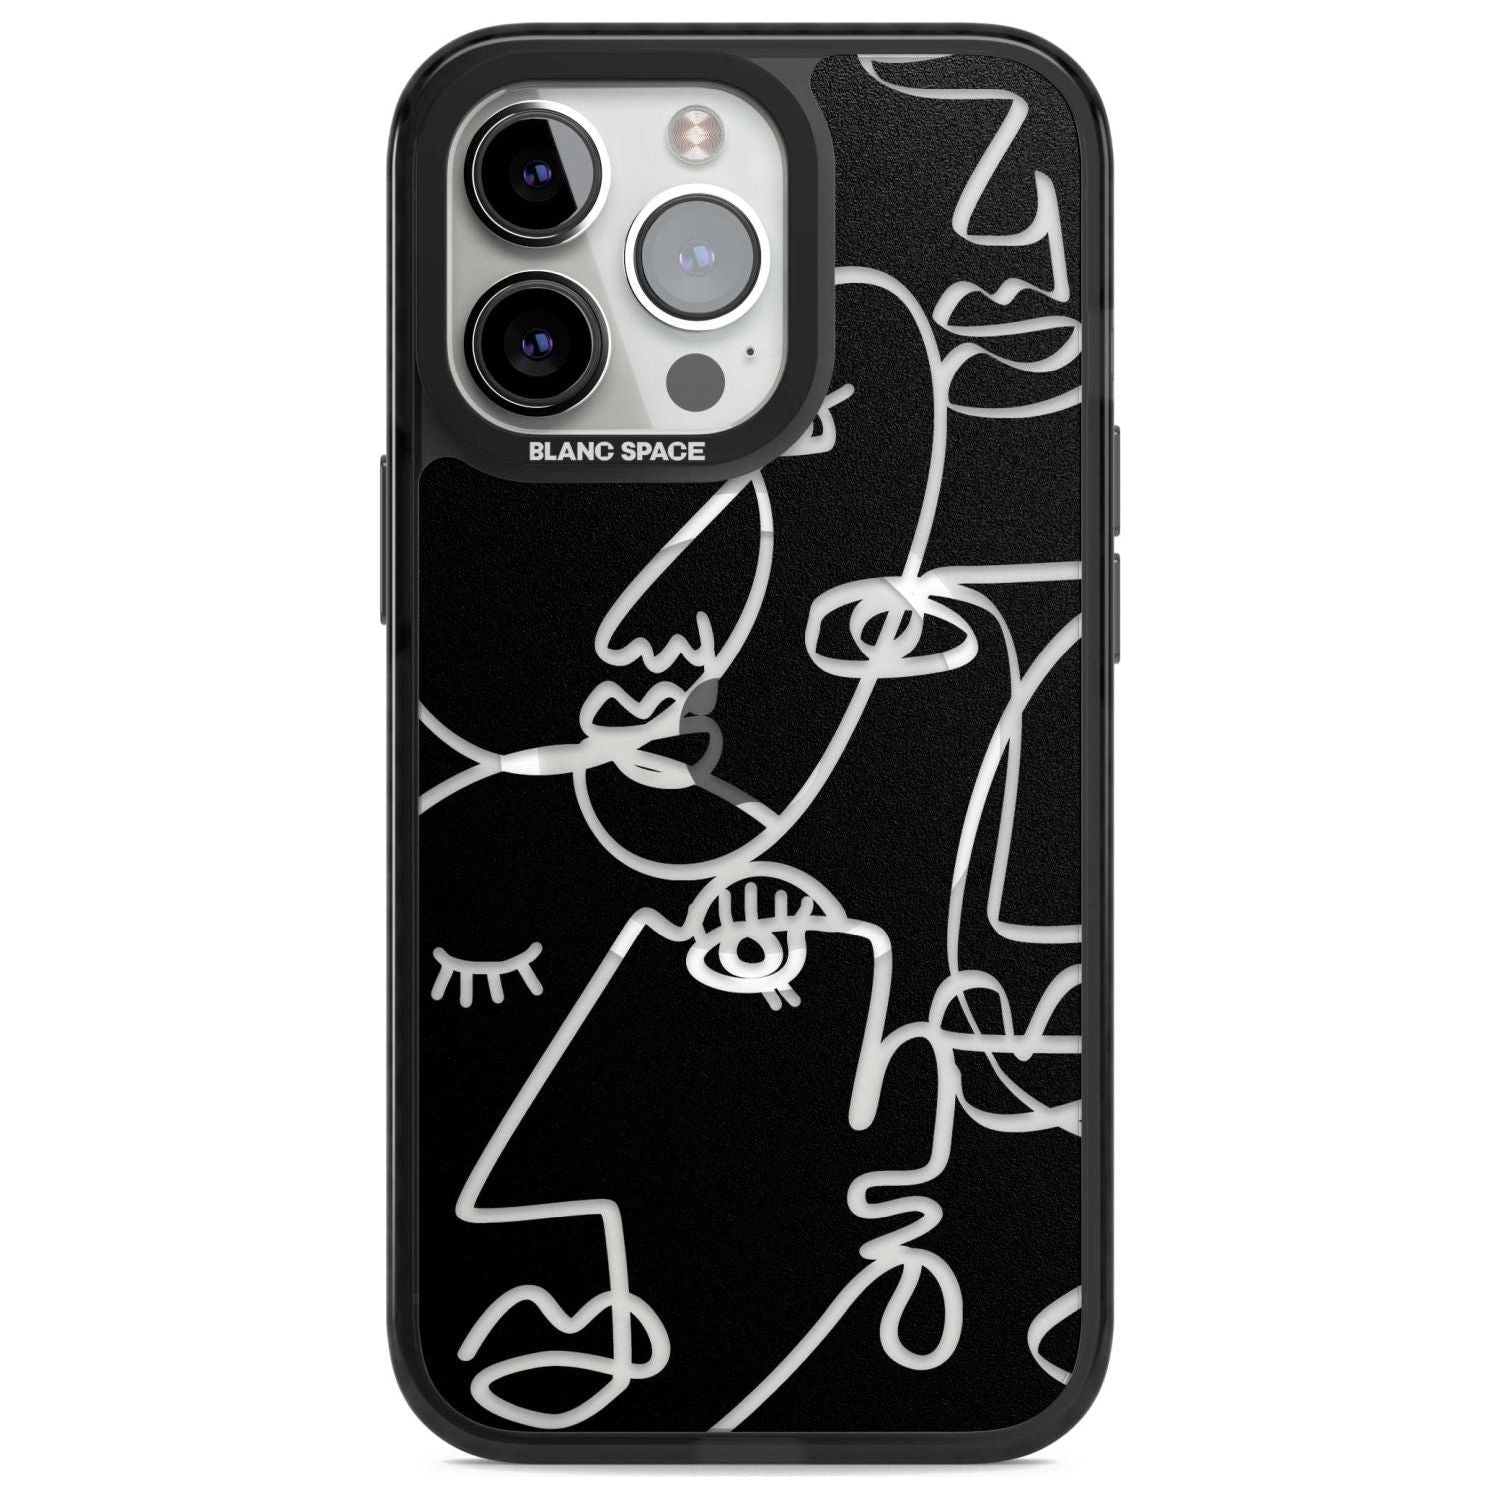 Abstract Continuous Line Faces Clear on Black Phone Case iPhone 15 Pro Max / Magsafe Black Impact Case,iPhone 15 Pro / Magsafe Black Impact Case,iPhone 14 Pro Max / Magsafe Black Impact Case,iPhone 14 Pro / Magsafe Black Impact Case,iPhone 13 Pro / Magsafe Black Impact Case Blanc Space